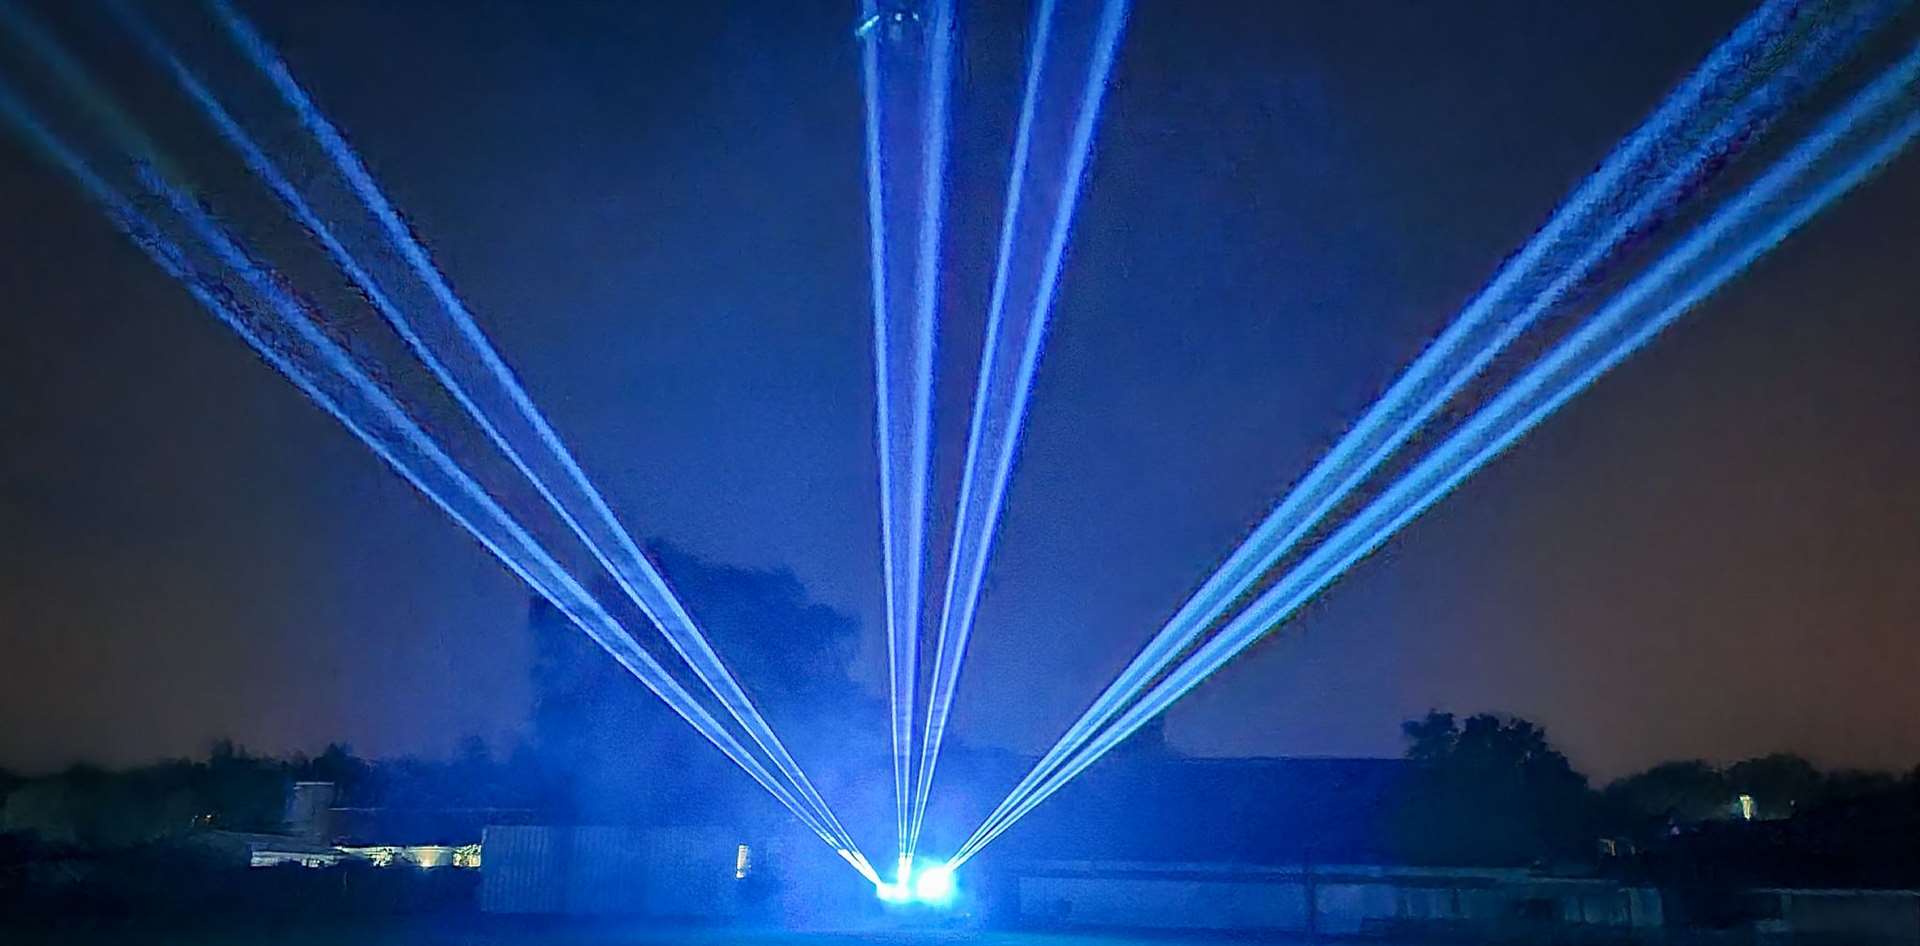 The lasers were shone into the night sky over Medway